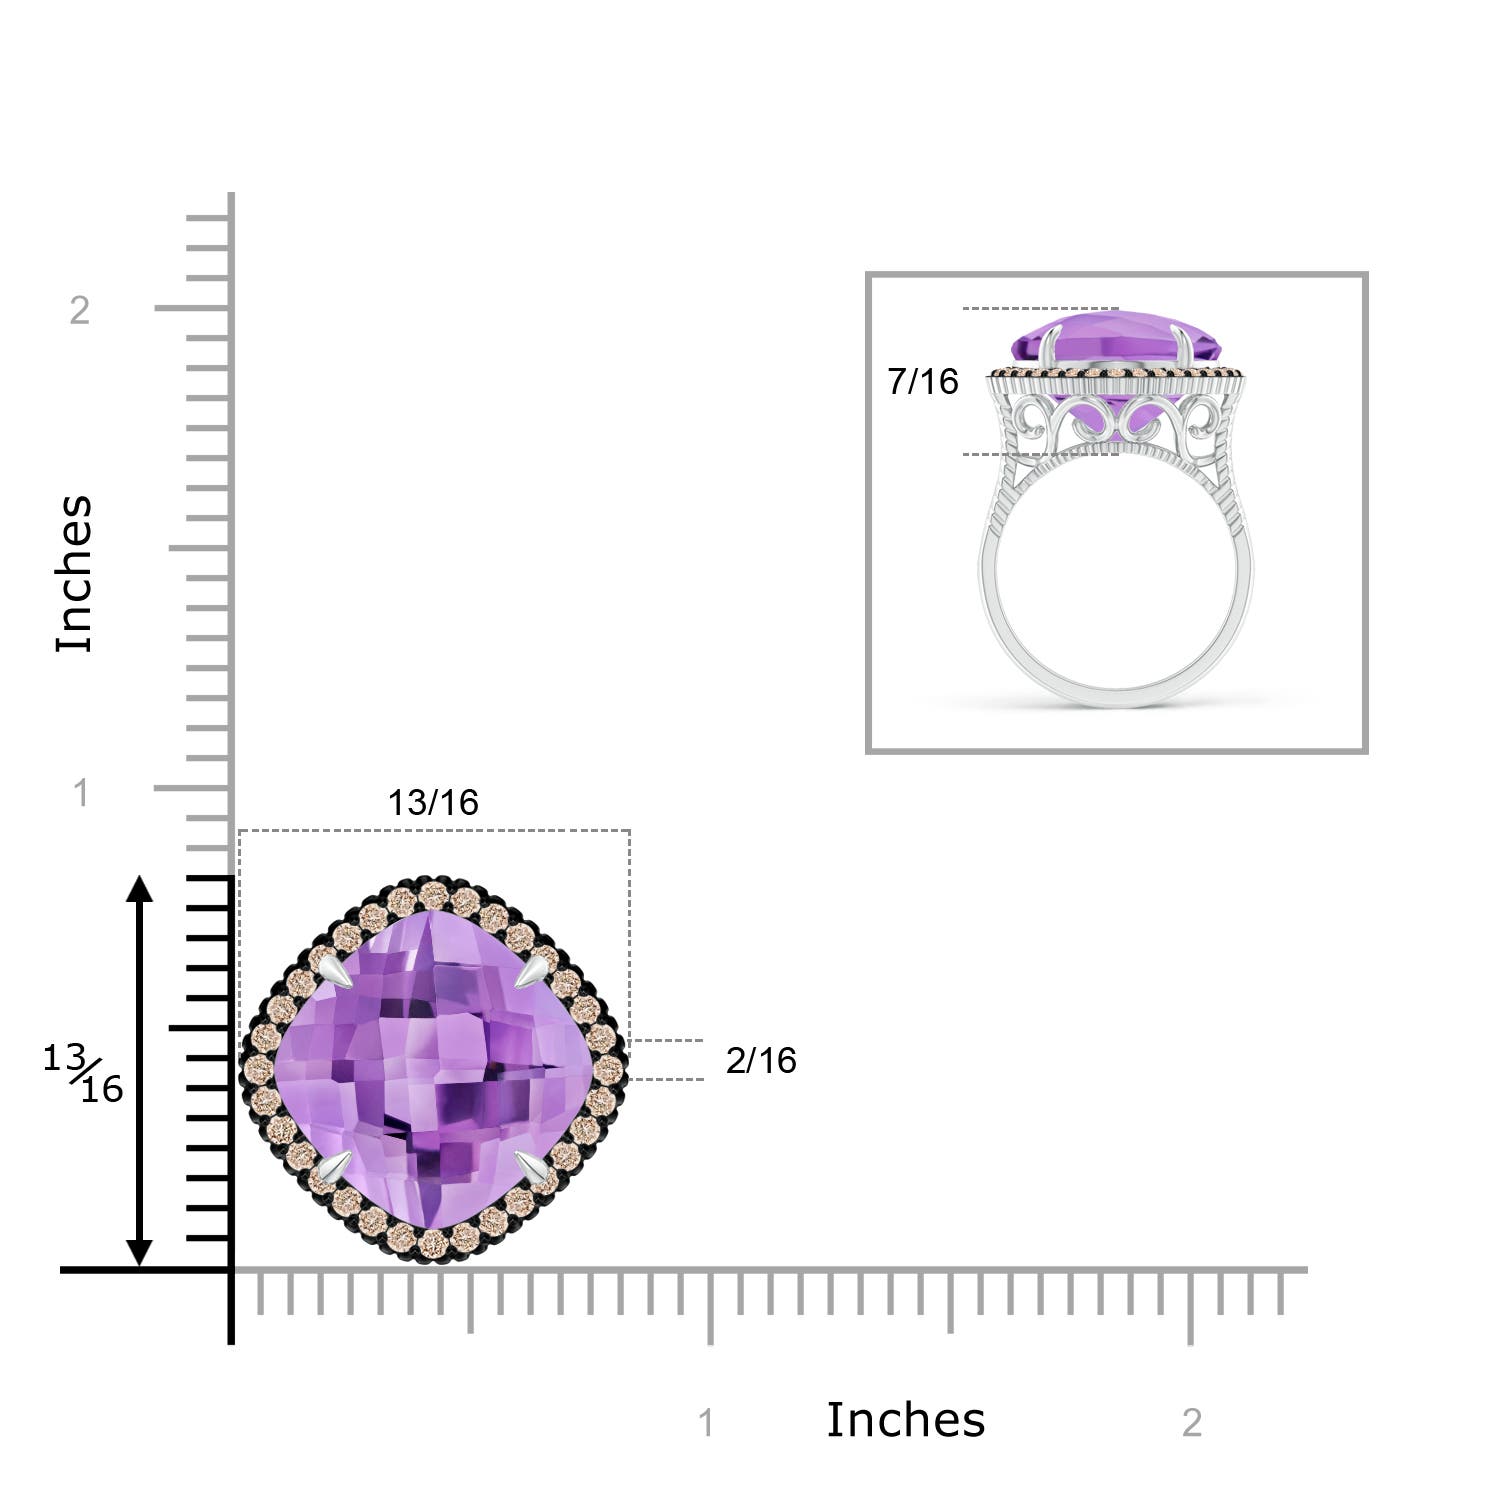 A - Amethyst / 14.08 CT / 14 KT White Gold